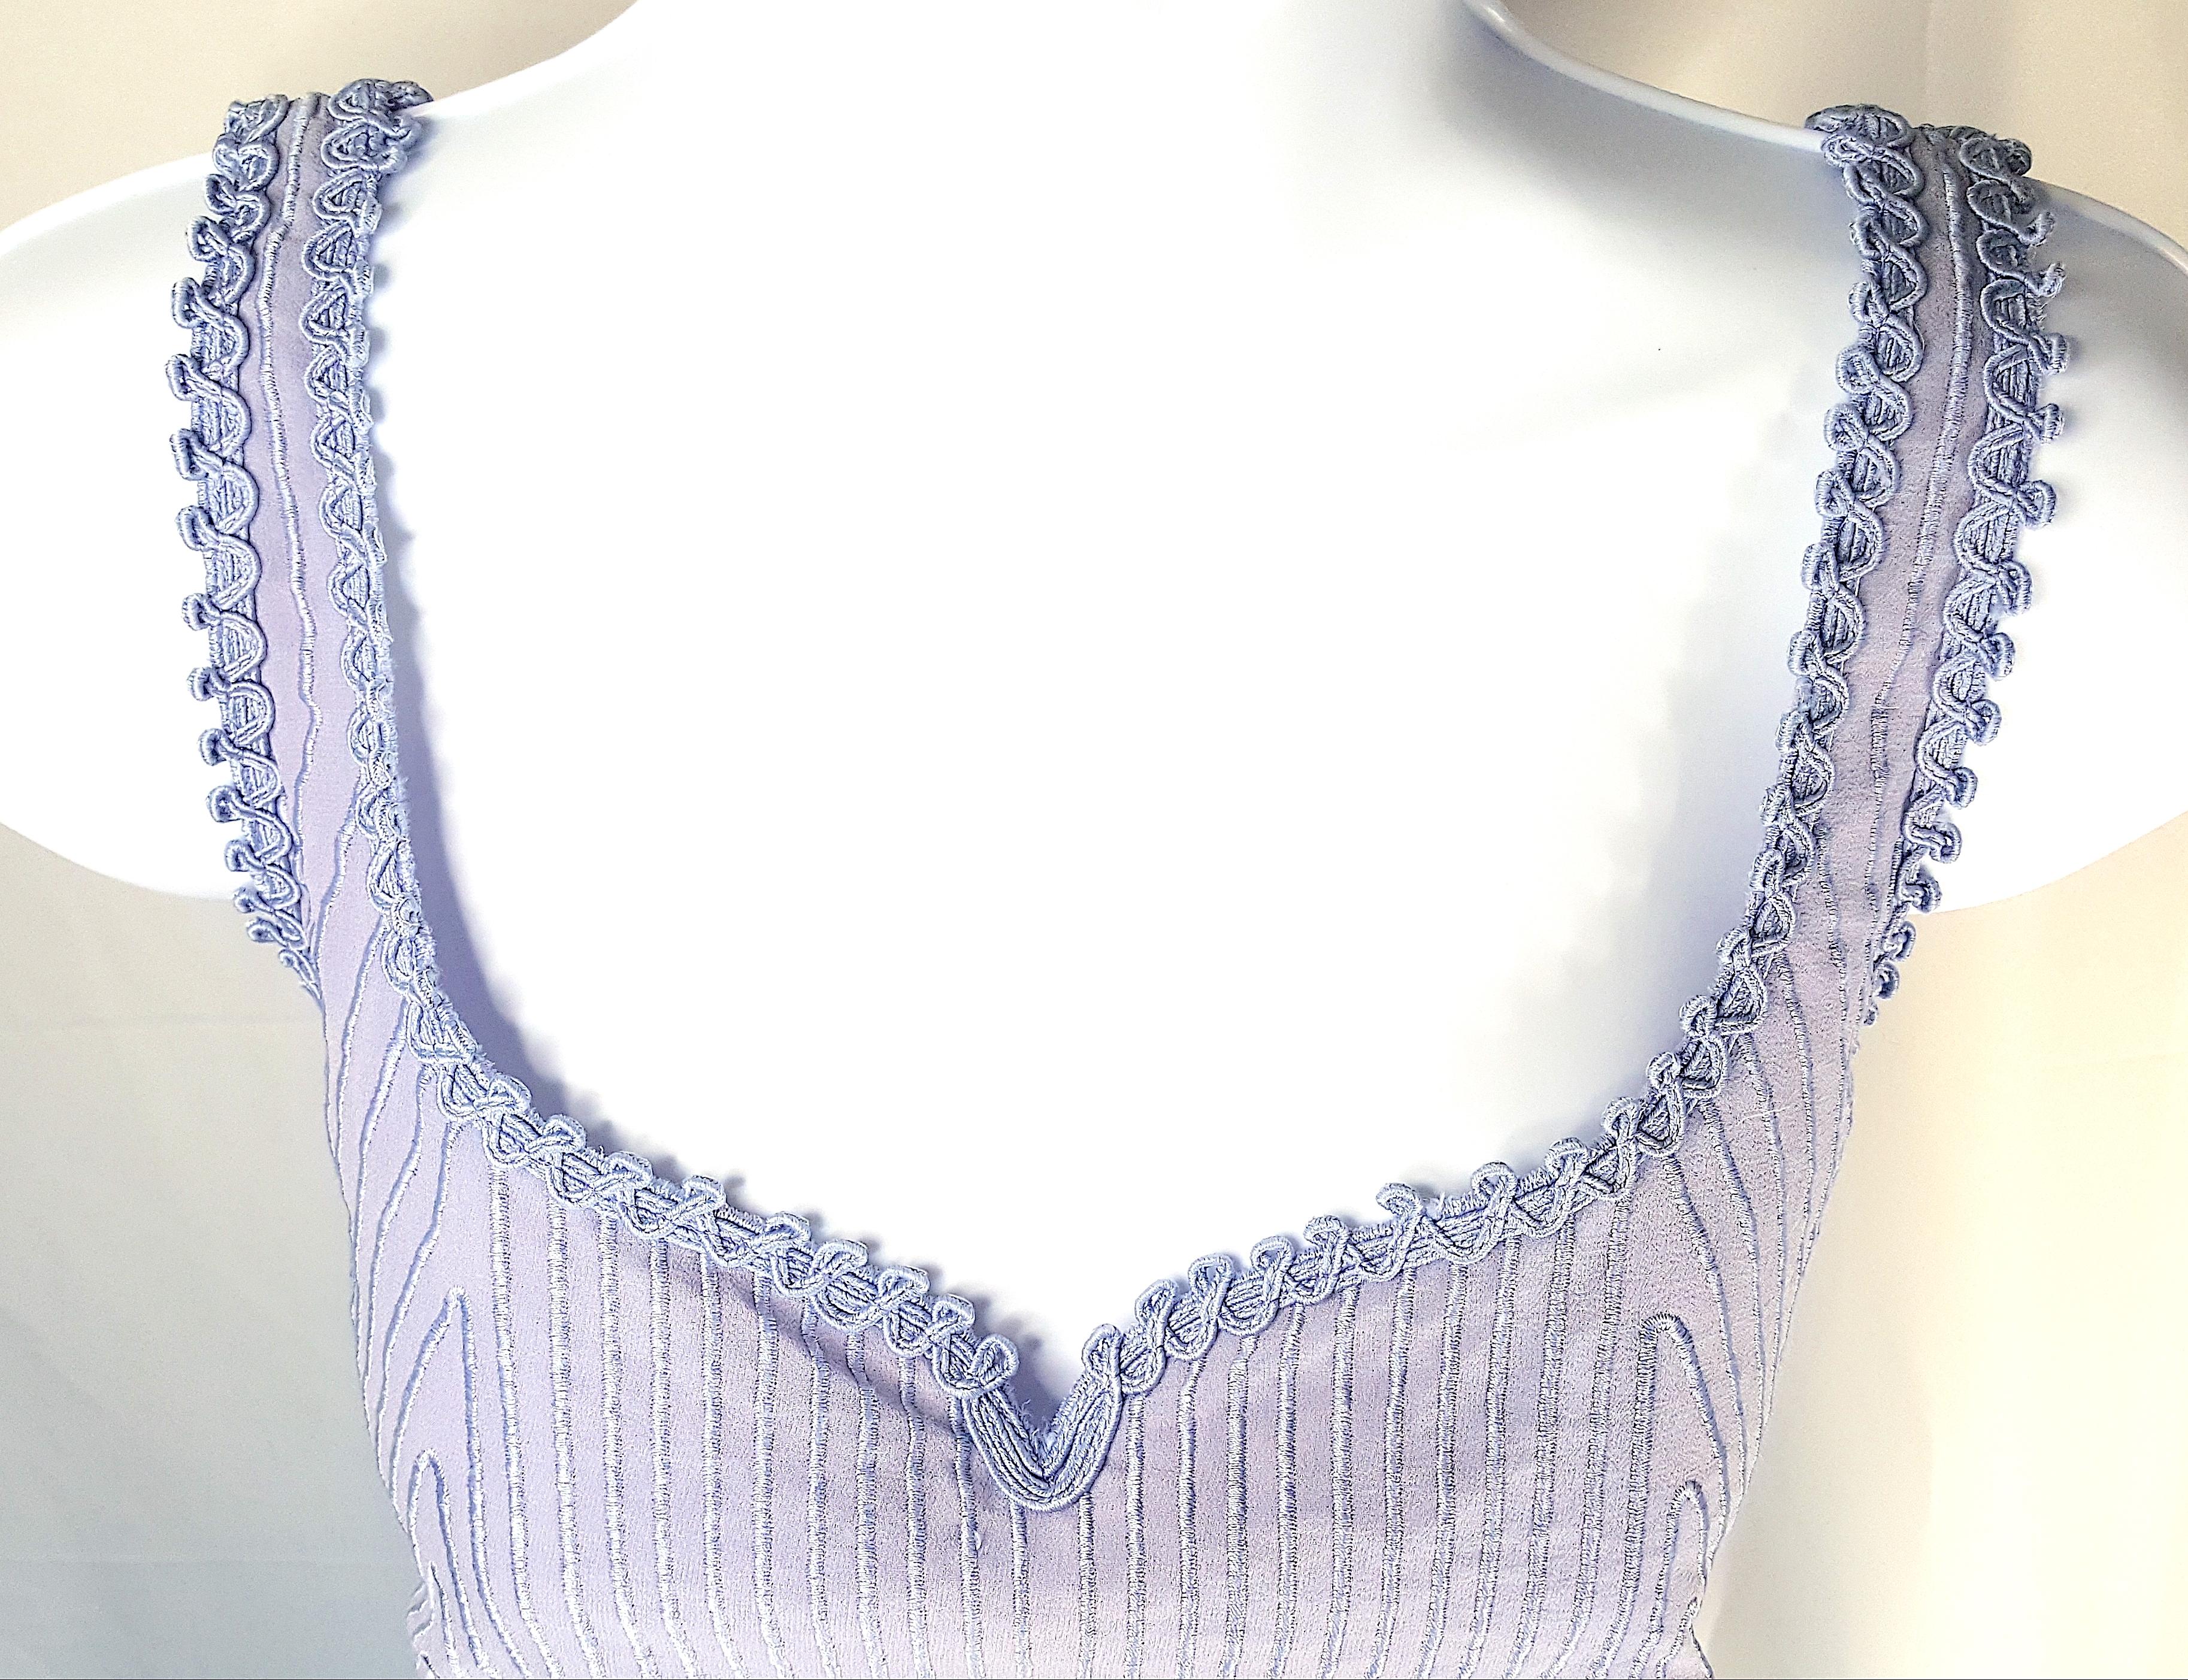 The late Italian fashion designer Gianni Versace near the end of his life--cut short by his murder in July 1997--designed this couture heavily-embroidered semi-transparent silk chiffon sleeveless hourglass corset-like side-zip pastel bodice for